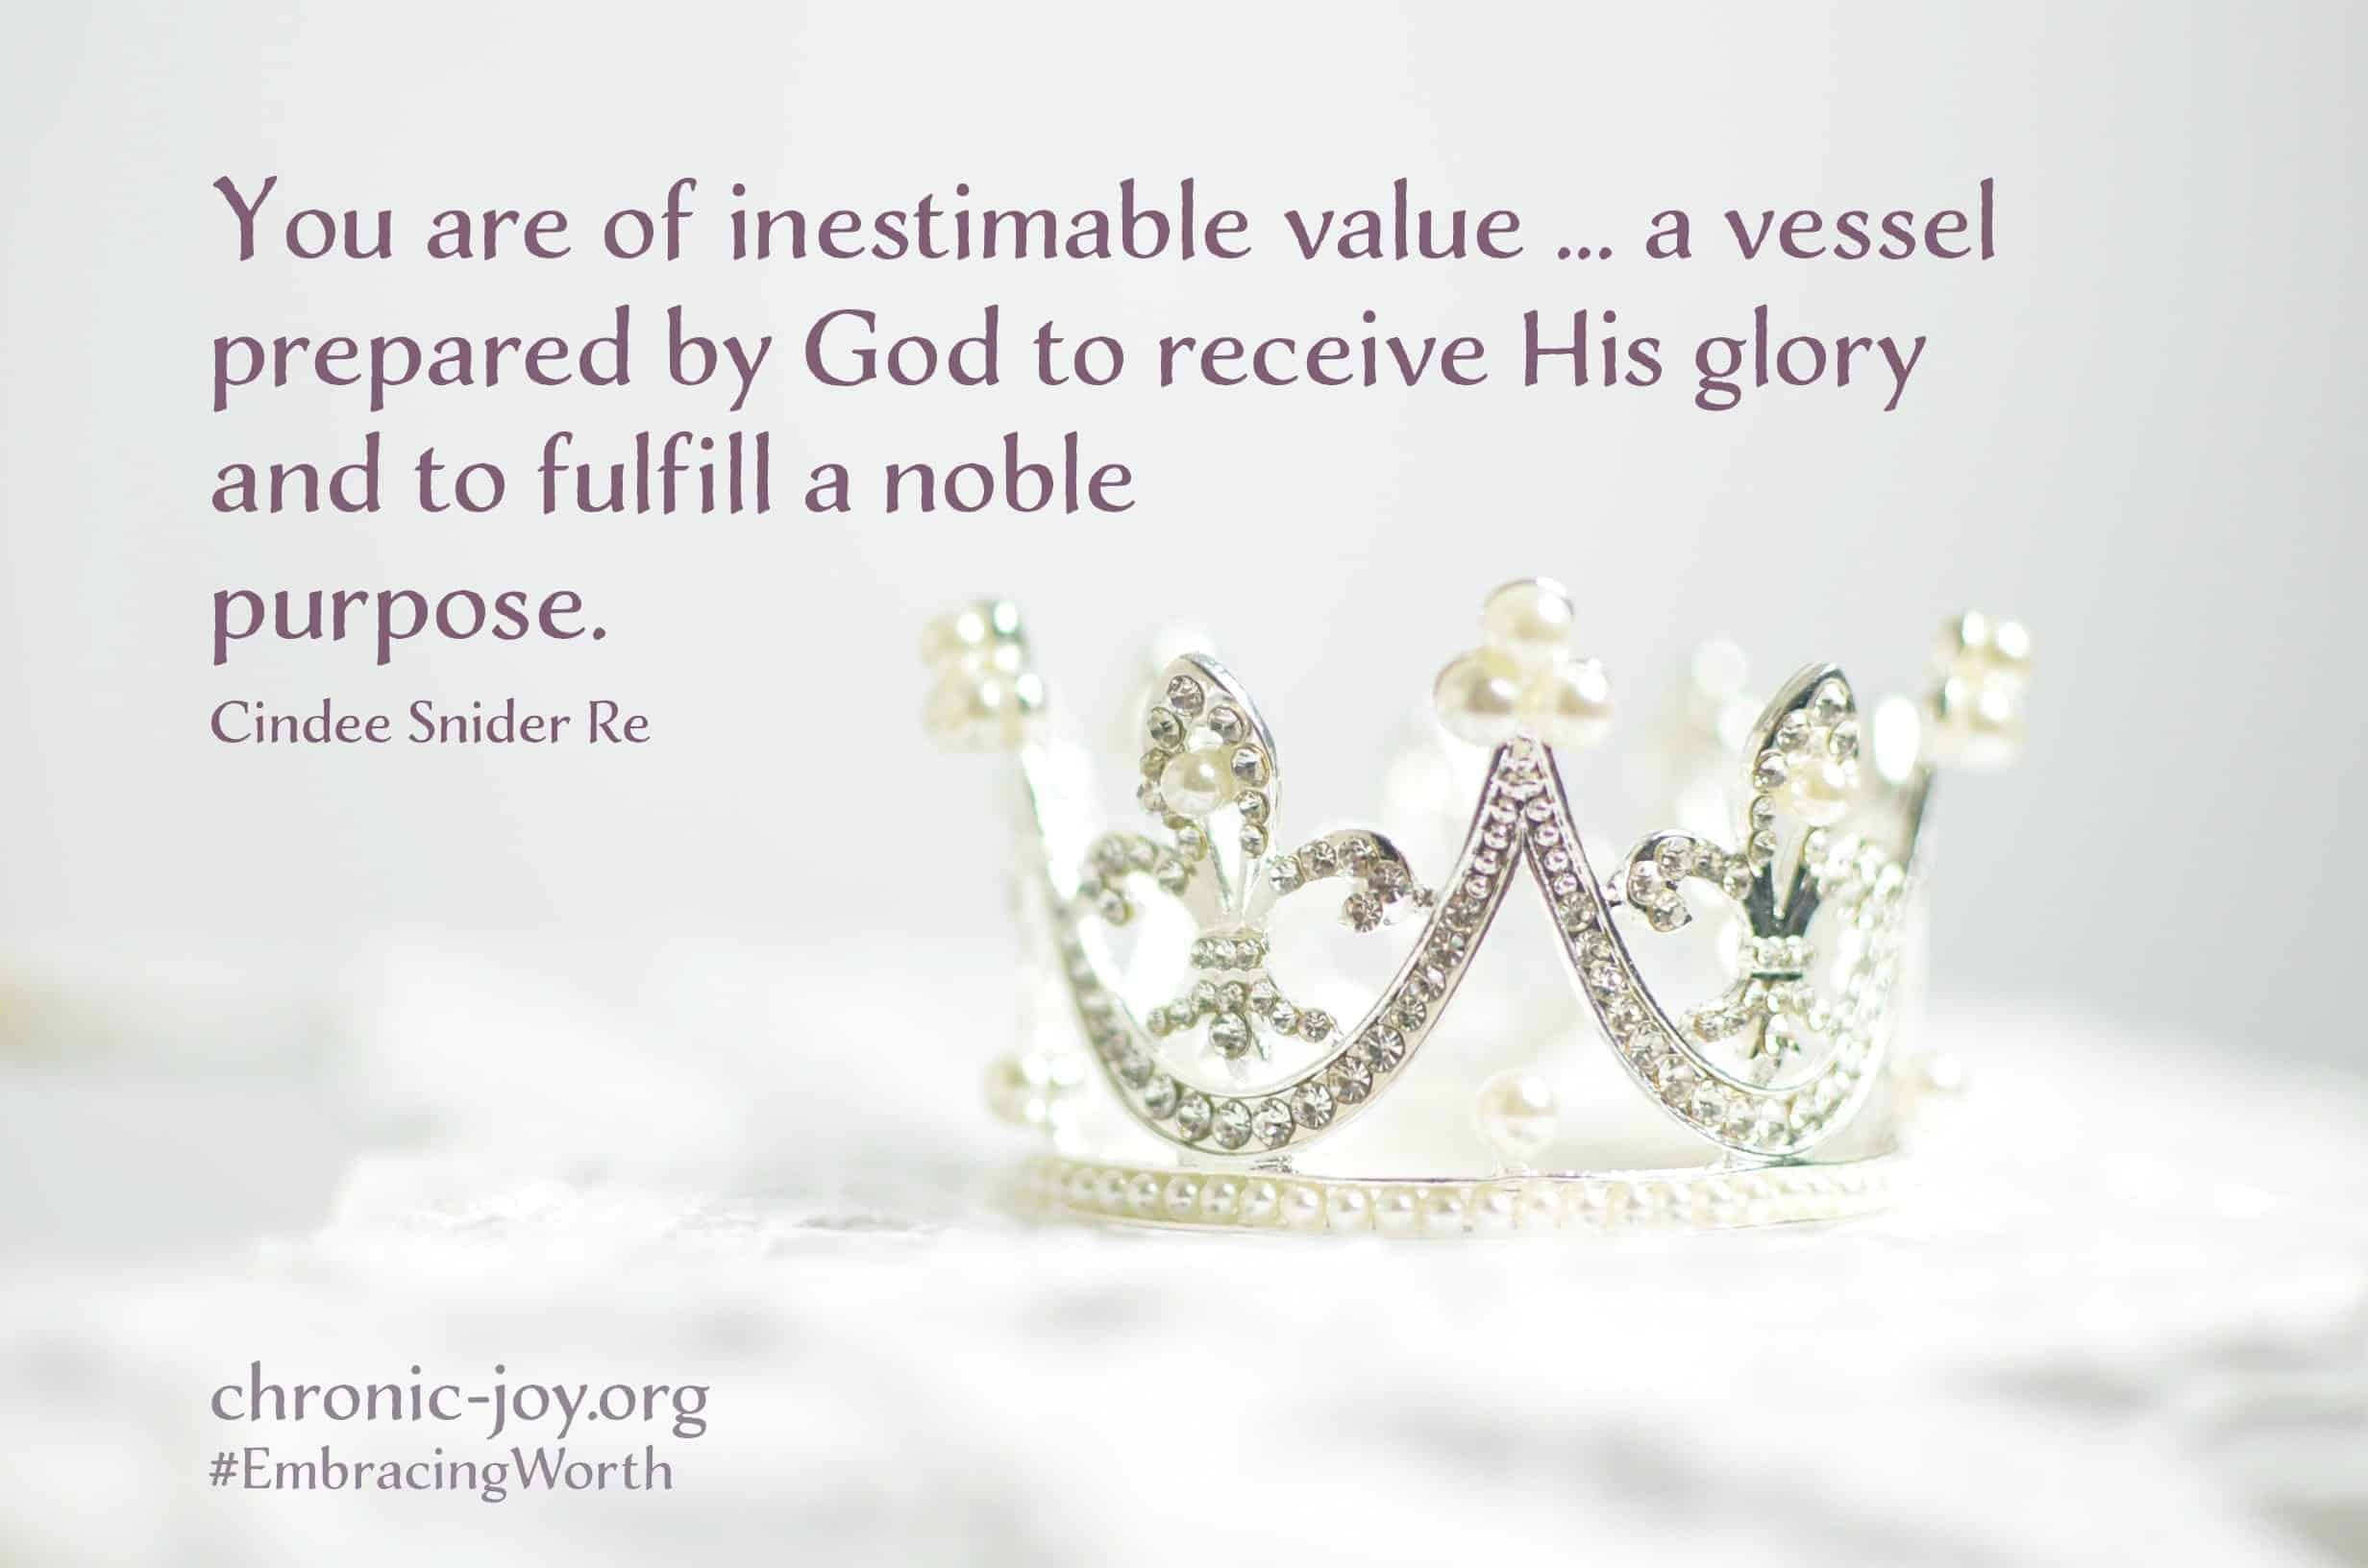 "You are of inestimable value ... a vessel prepared by God to receive His glory and to fulfill a noble purpose." Cindee Snider Re